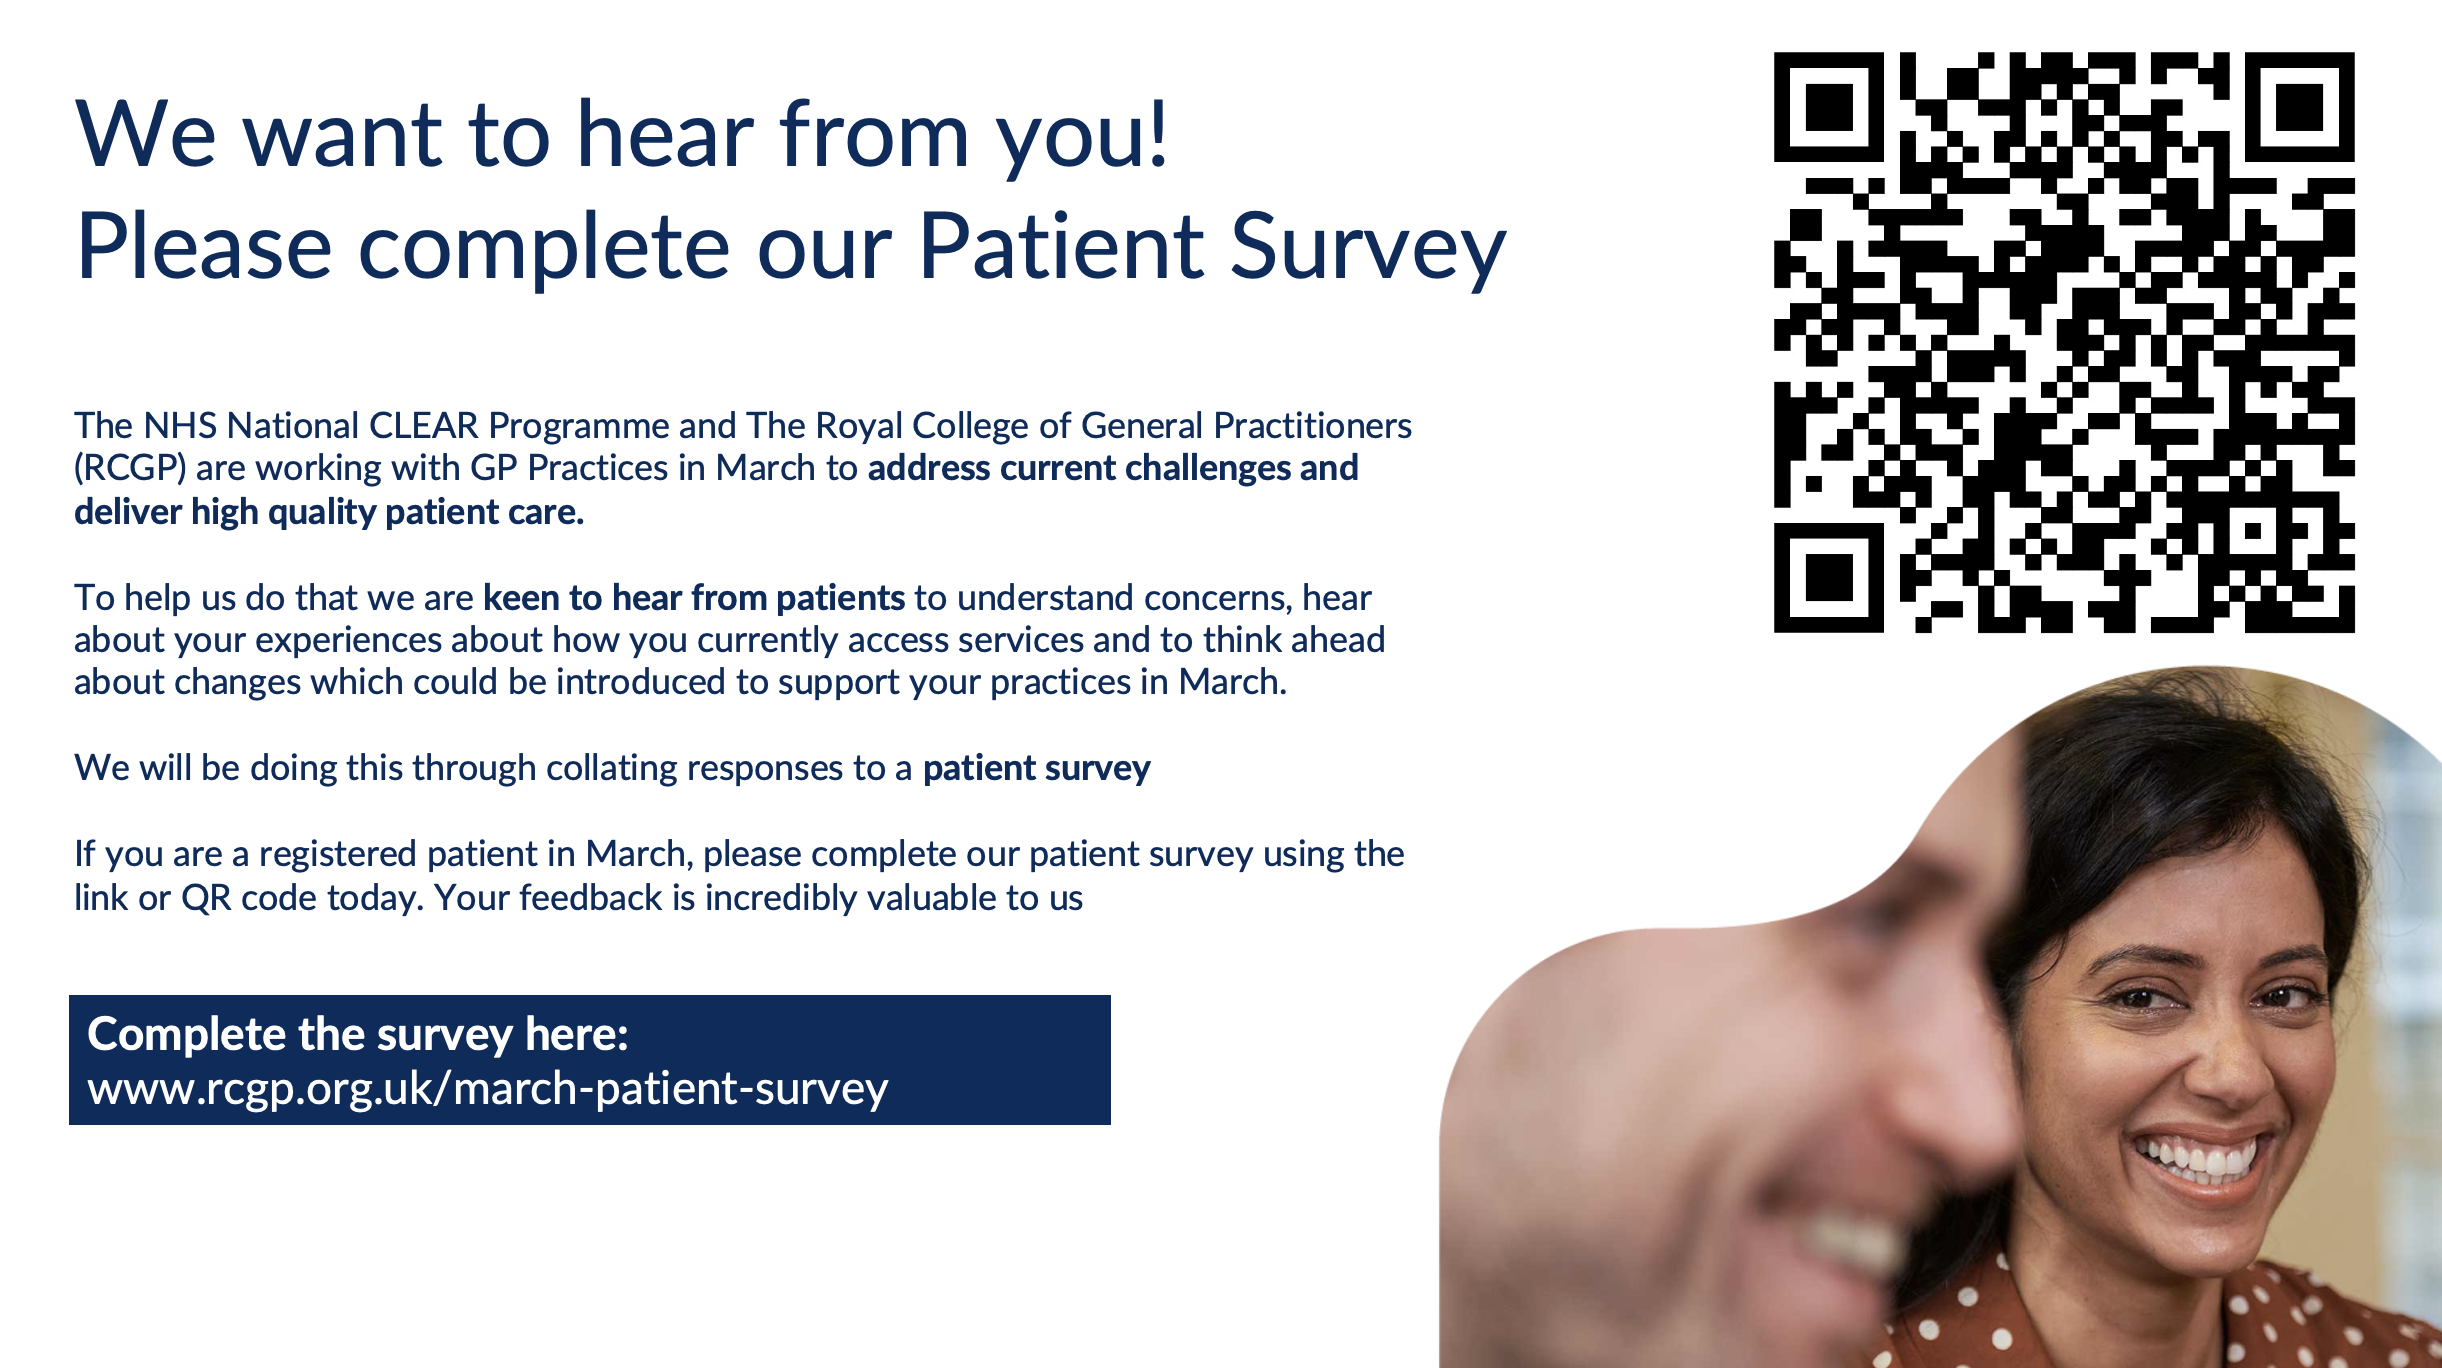 We want to hear from you, complete our patient survey